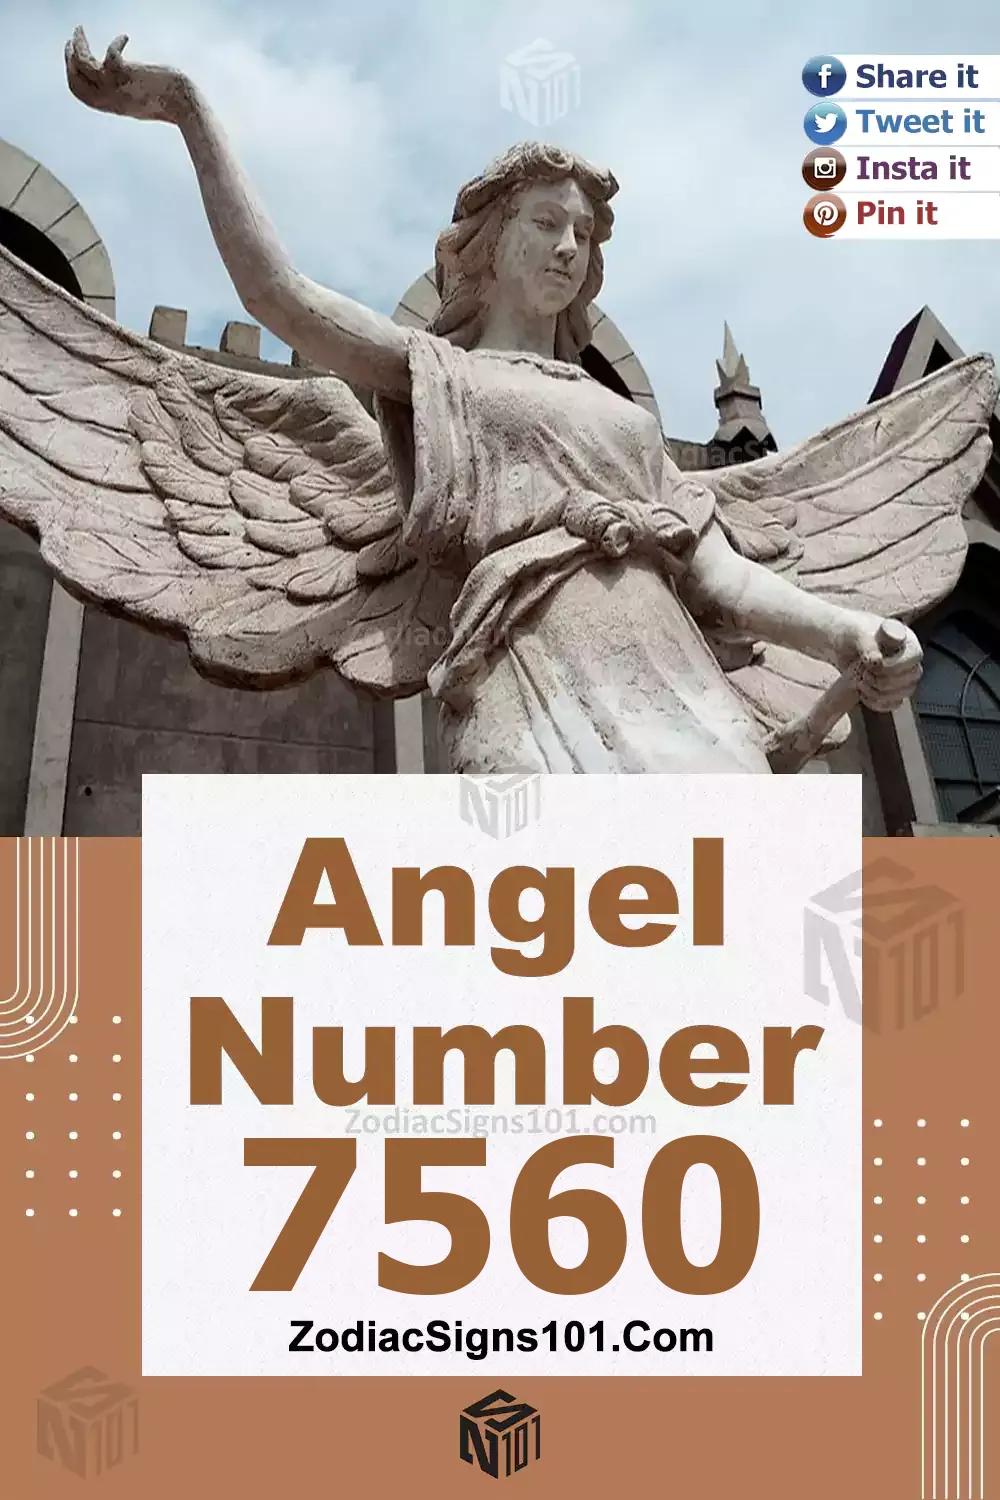 7560 Angel Number Meaning